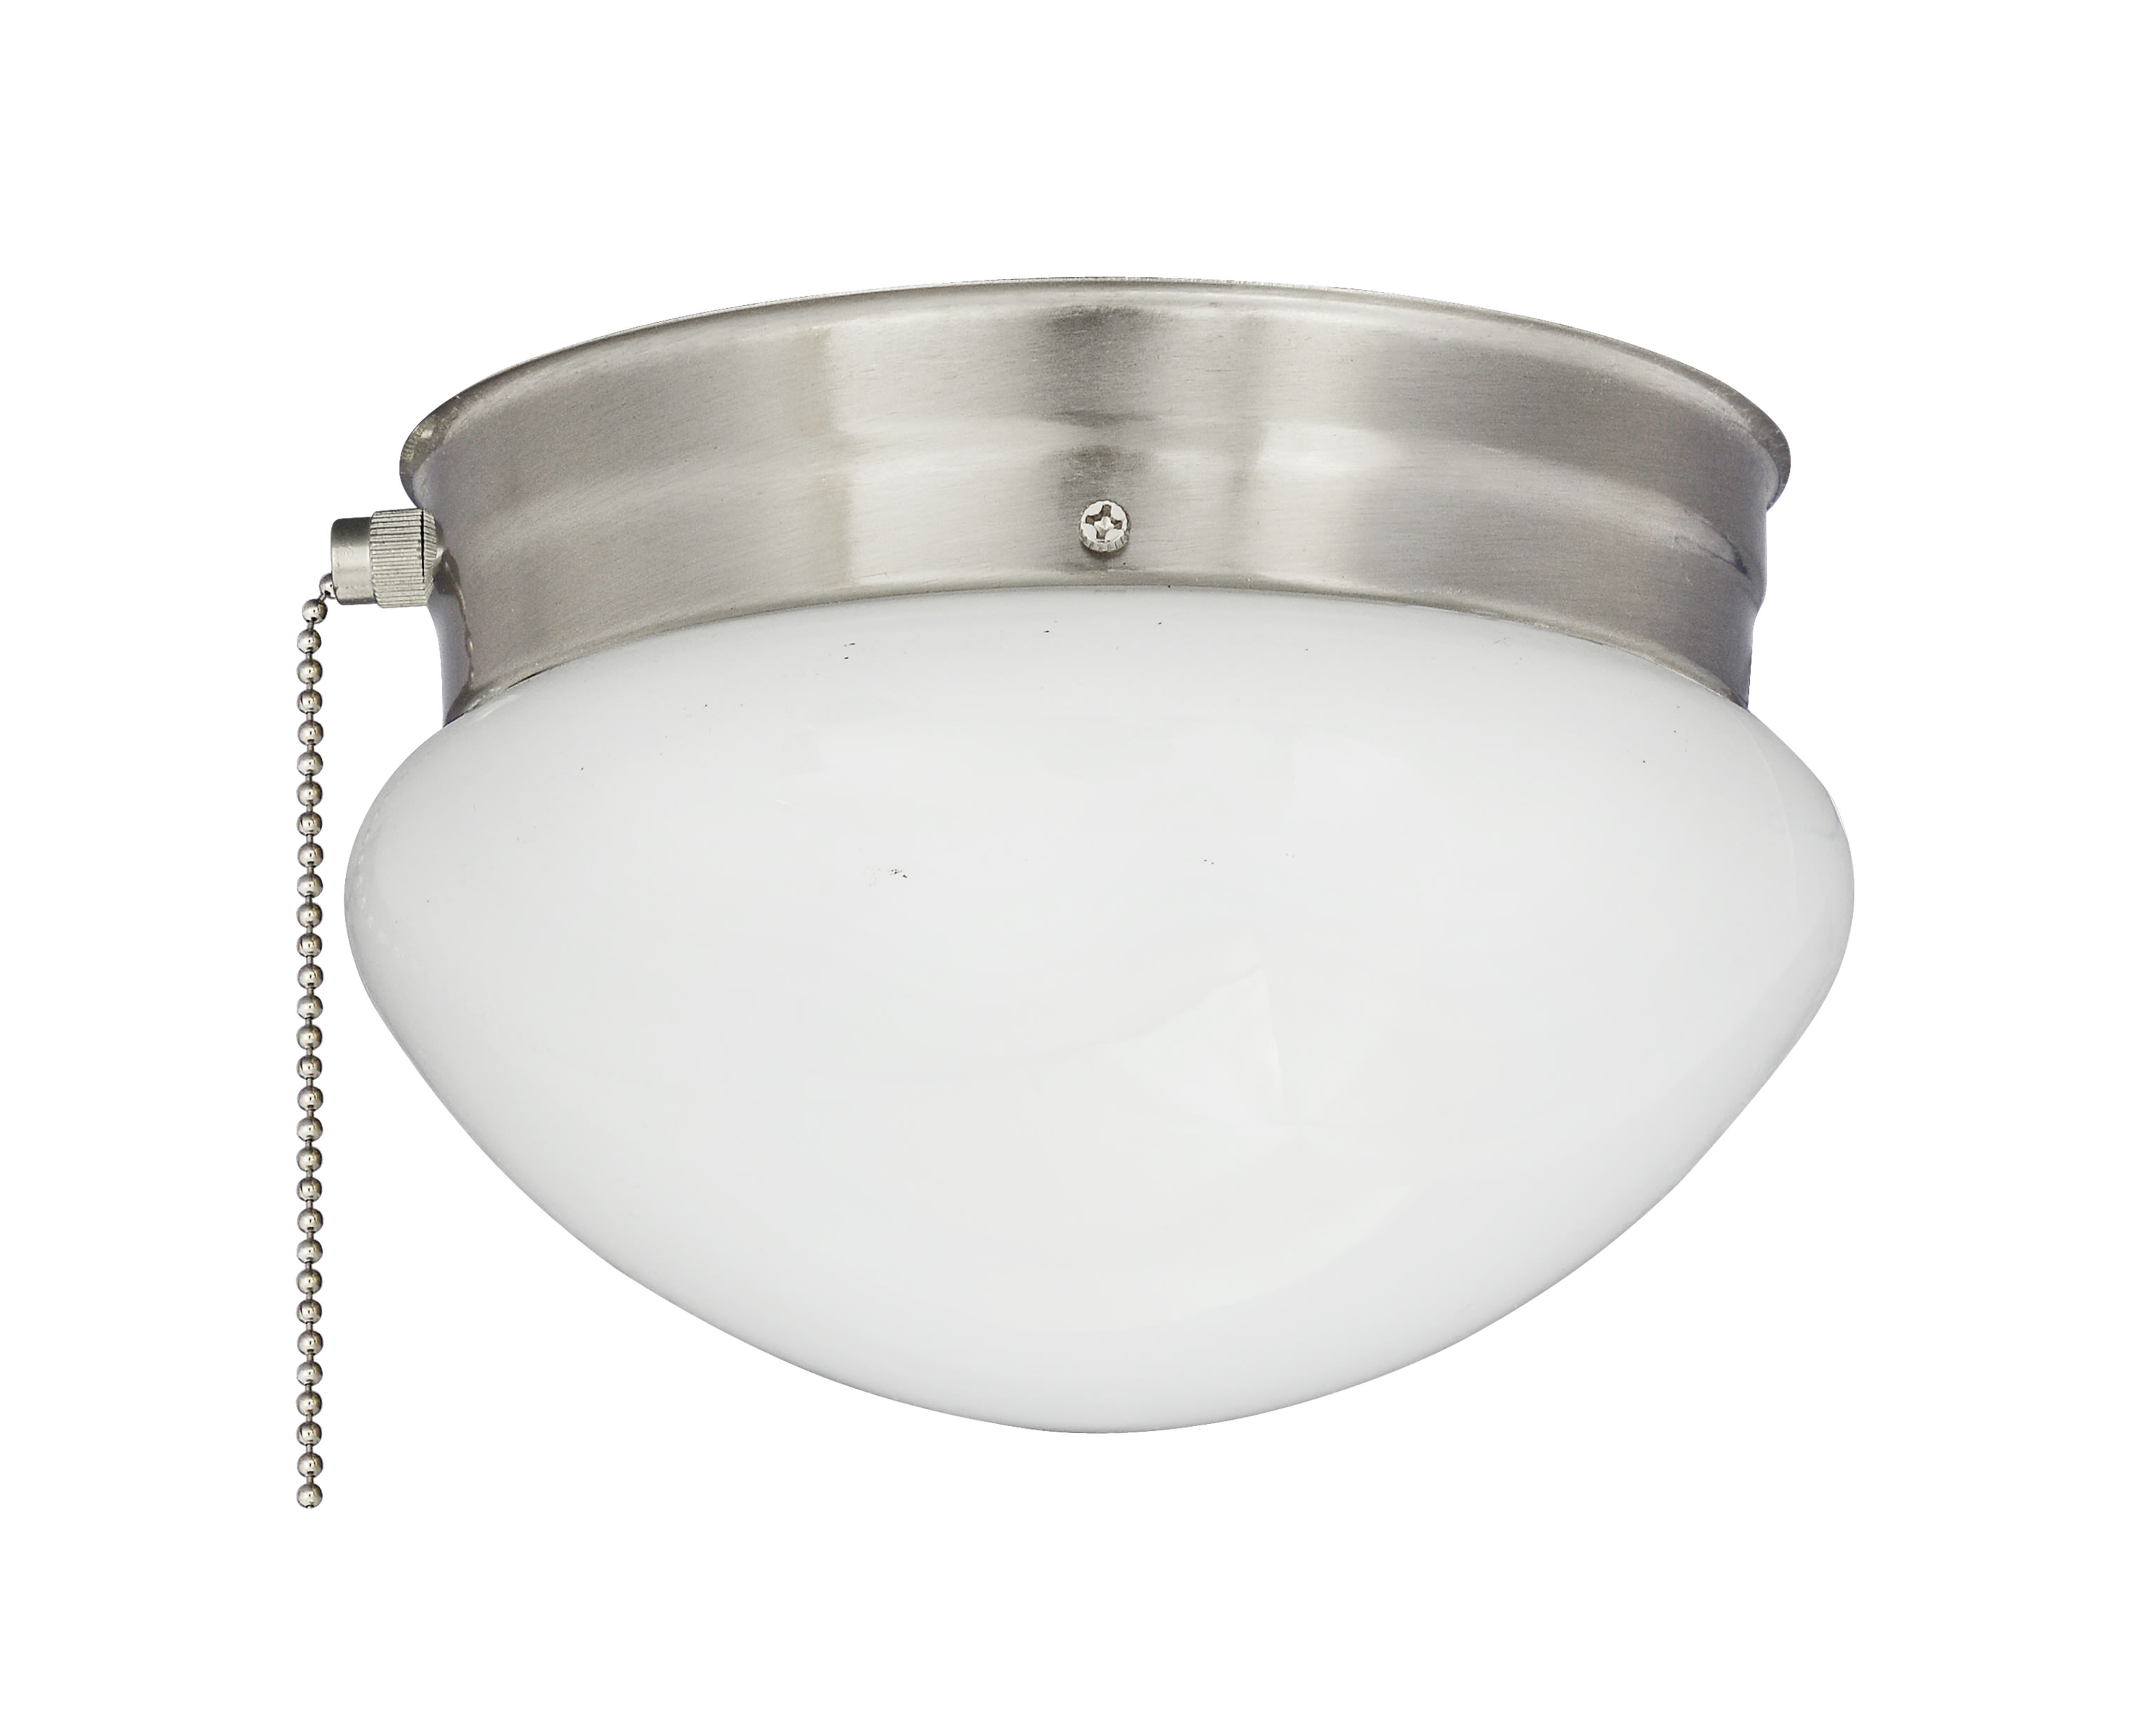 Bowl Ceiling Fixture With Pull Chain